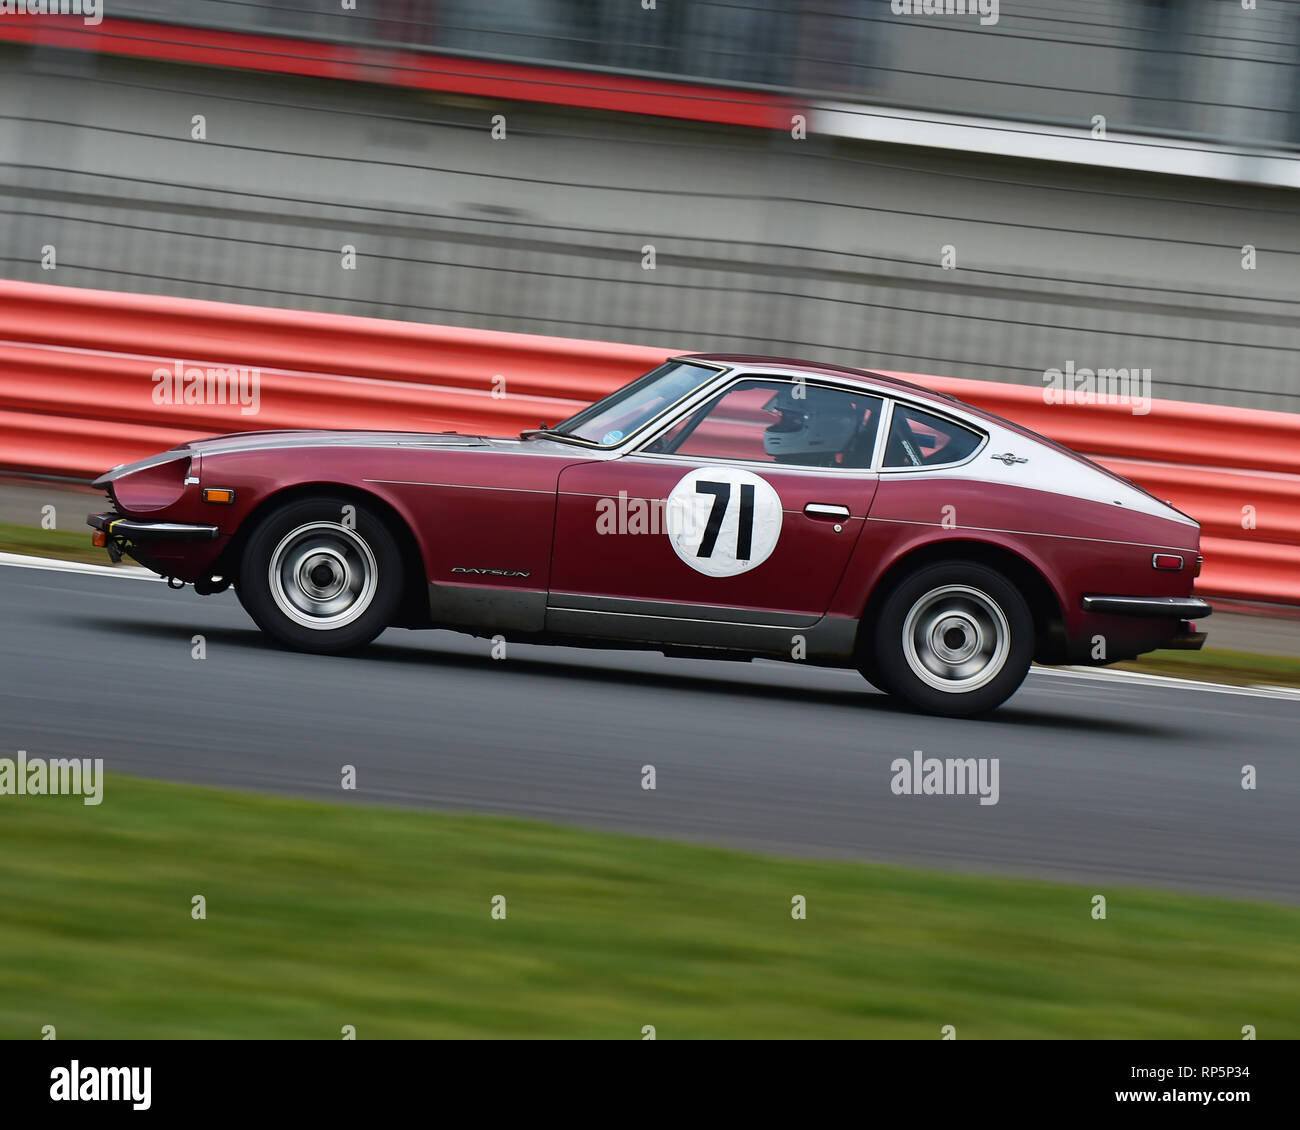 Paul Stafford, Datsun 240Z, VSCC, Pomeroy Trophy, Silverstone, 16th February 2019, cars, competition, February, Fun, historic cars, iconic, motor spor Stock Photo